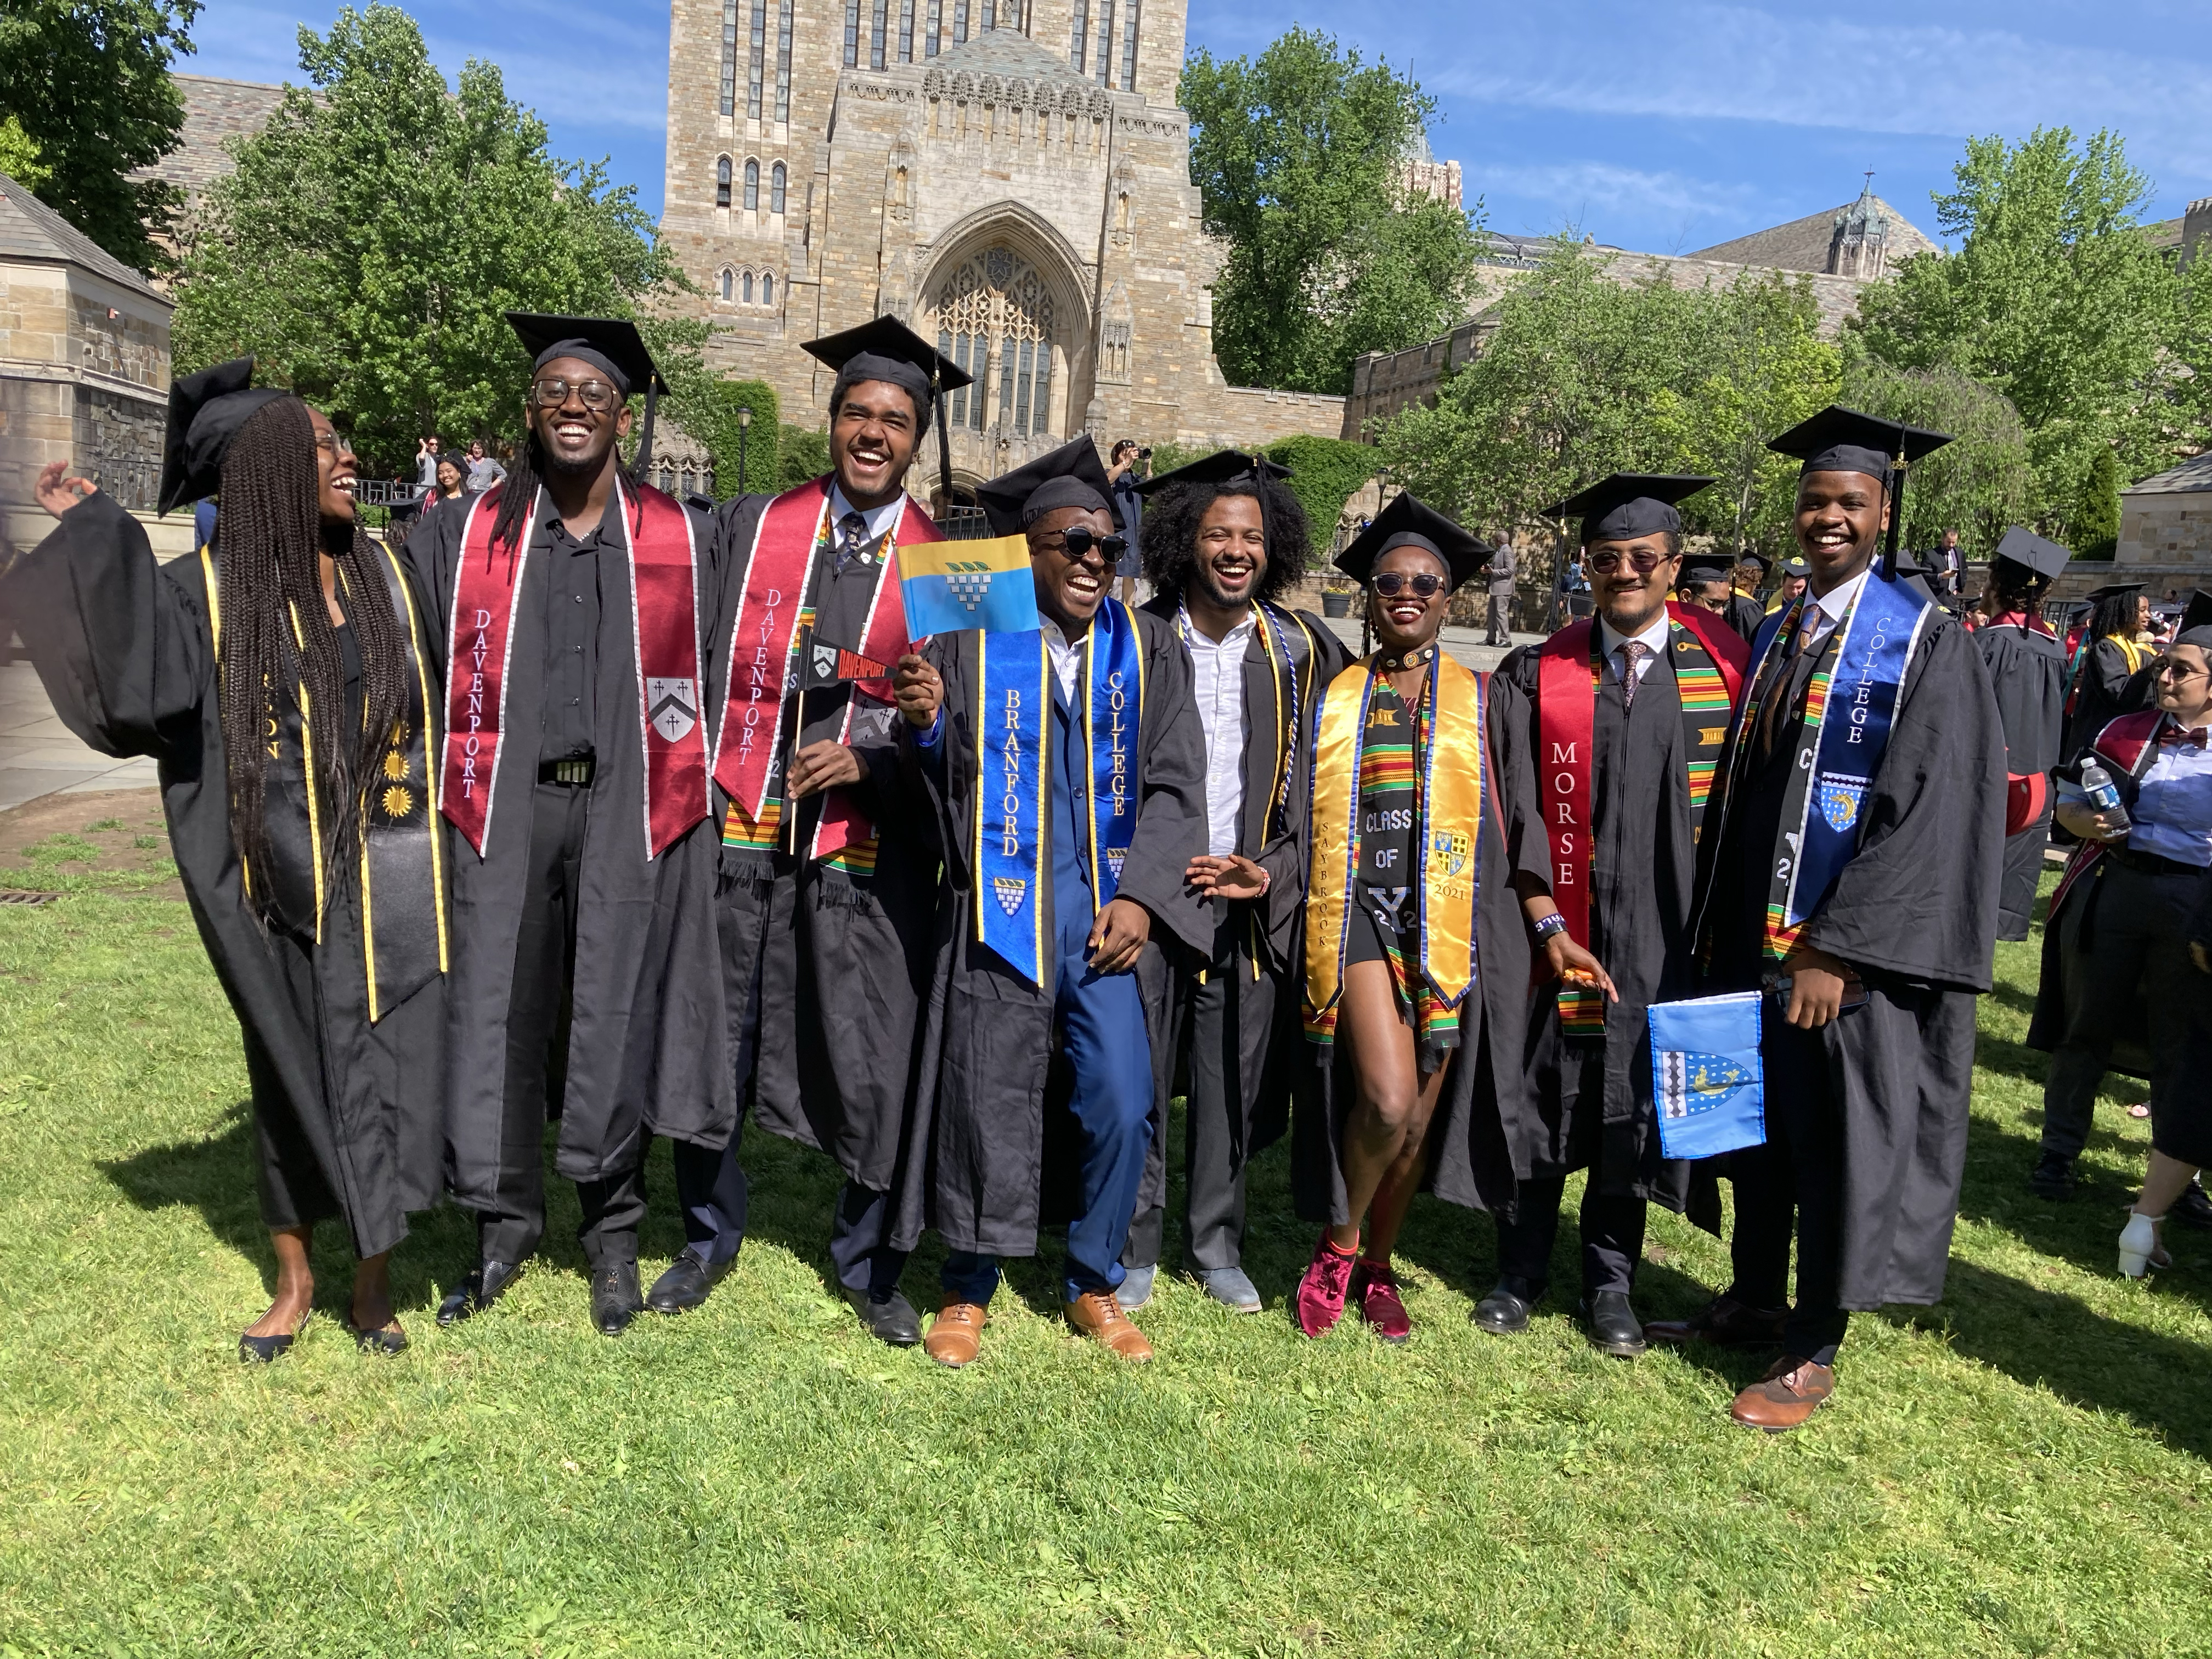 Eight graduates in caps and gowns--from Branford, Davenport, and Morse Colleges--are posing and laughing, several wearing kente cloth stoles.